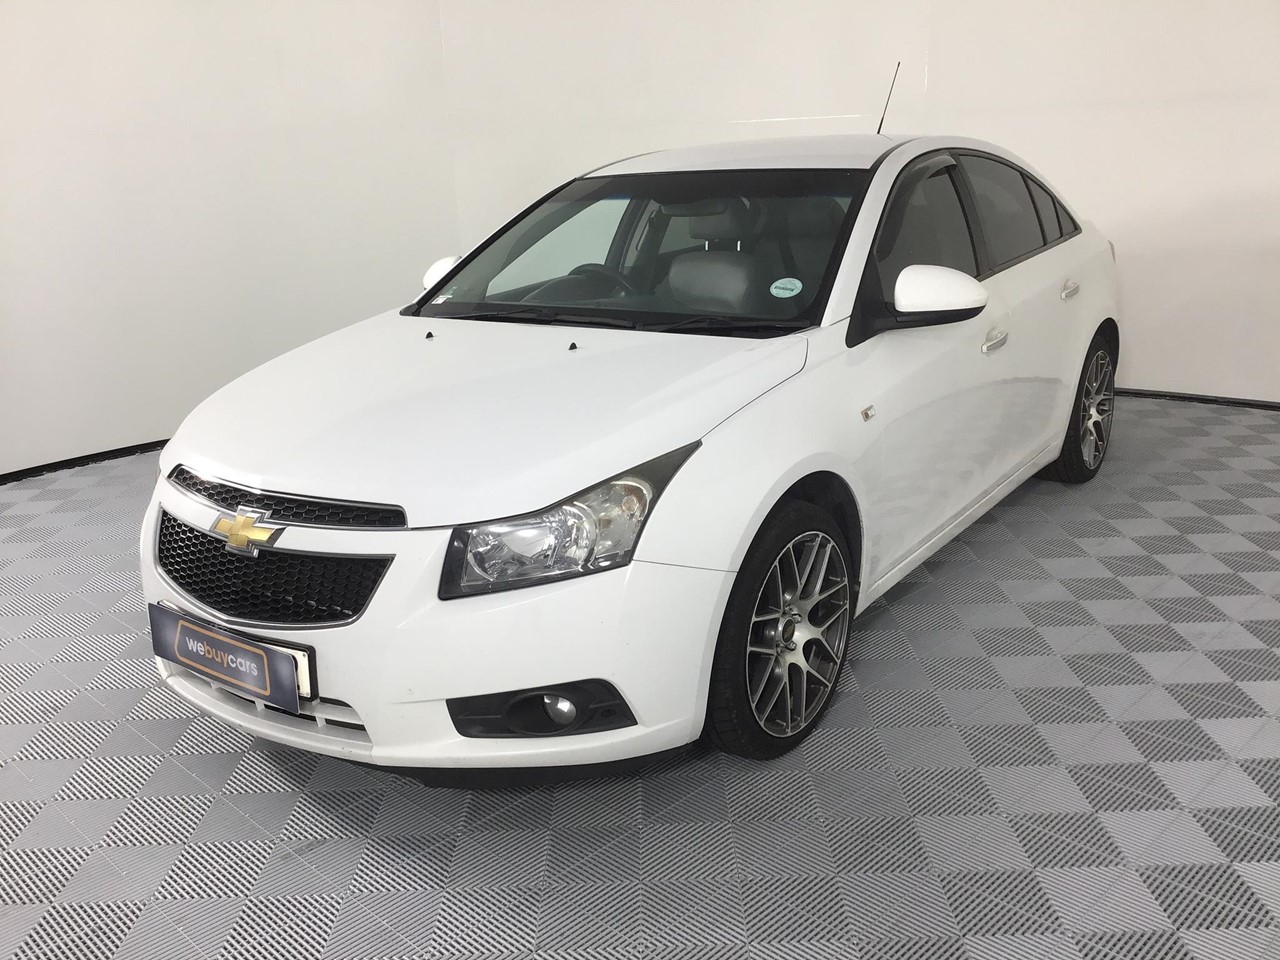 Used 2009 Chevrolet Cruze 1.8 LT Auto for sale WeBuyCars